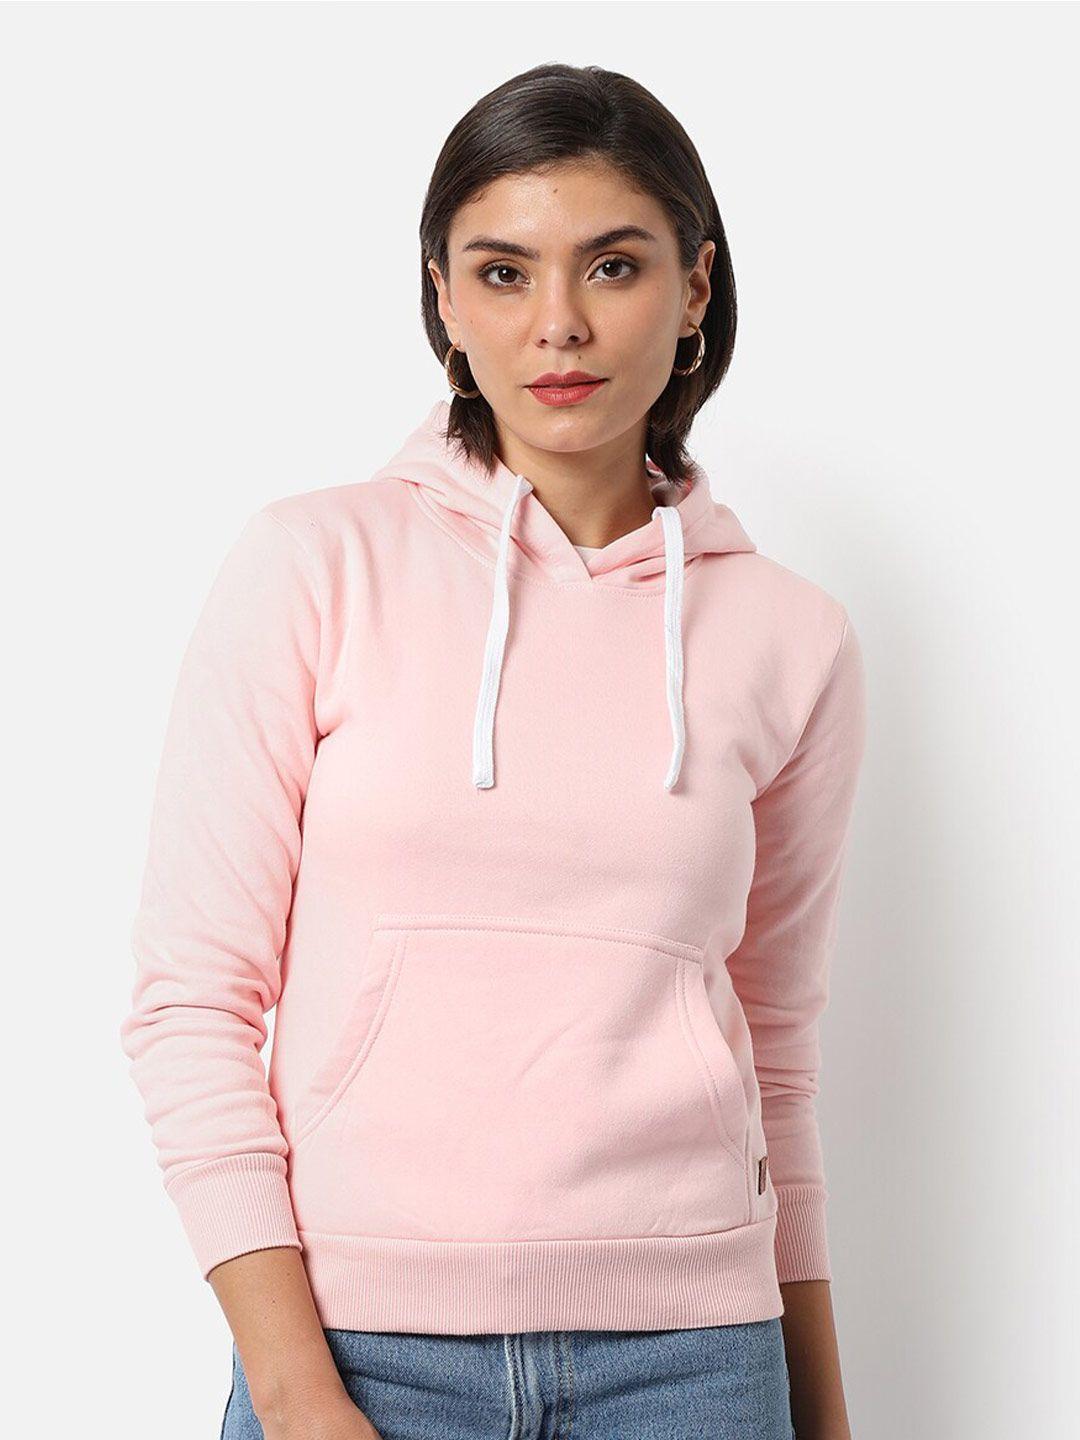 campus sutra women pink solid hooded pull over sweatshirt